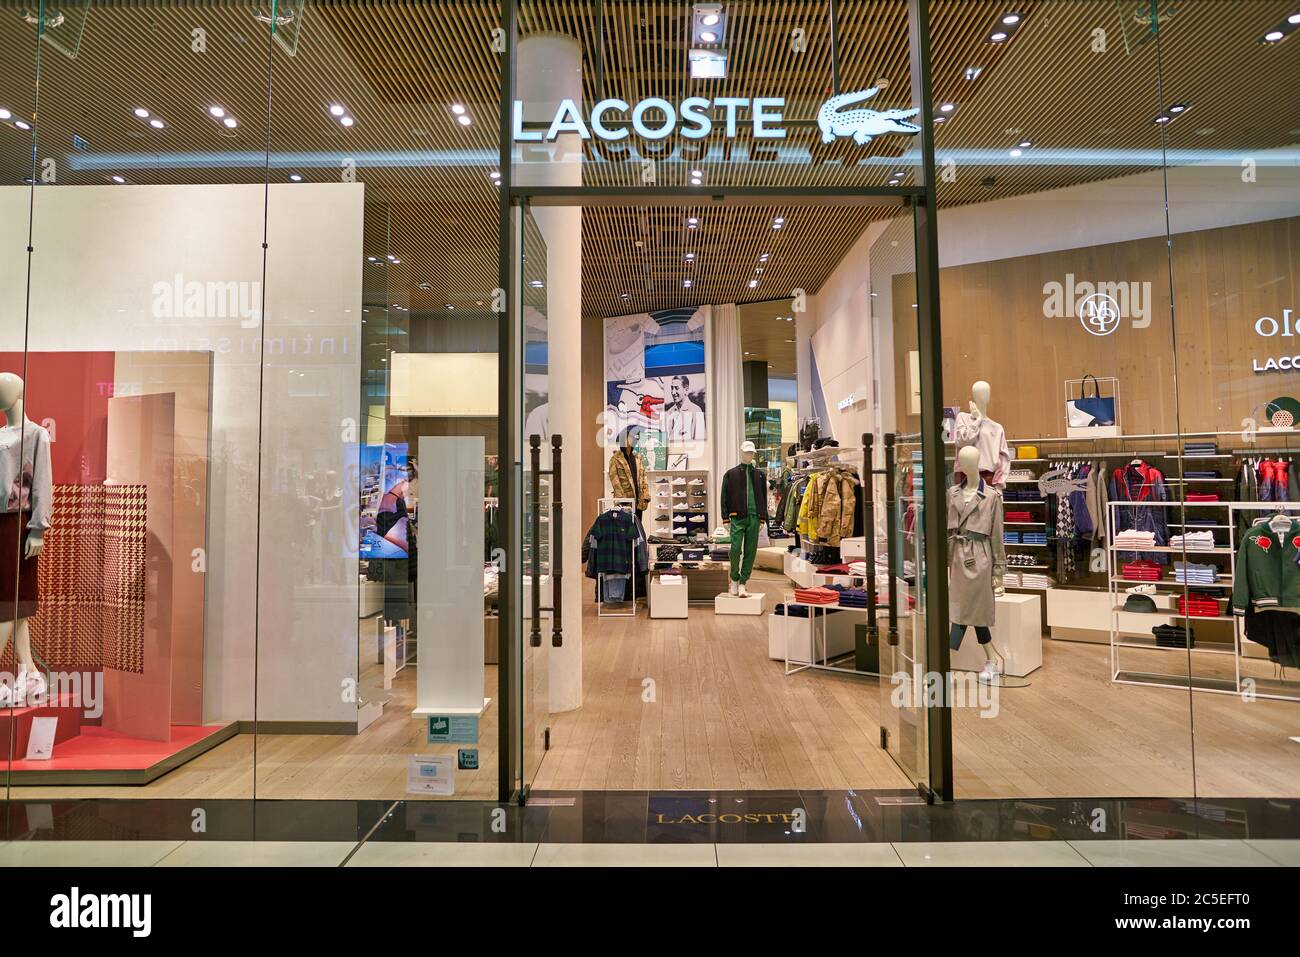 lacoste showroom in cp